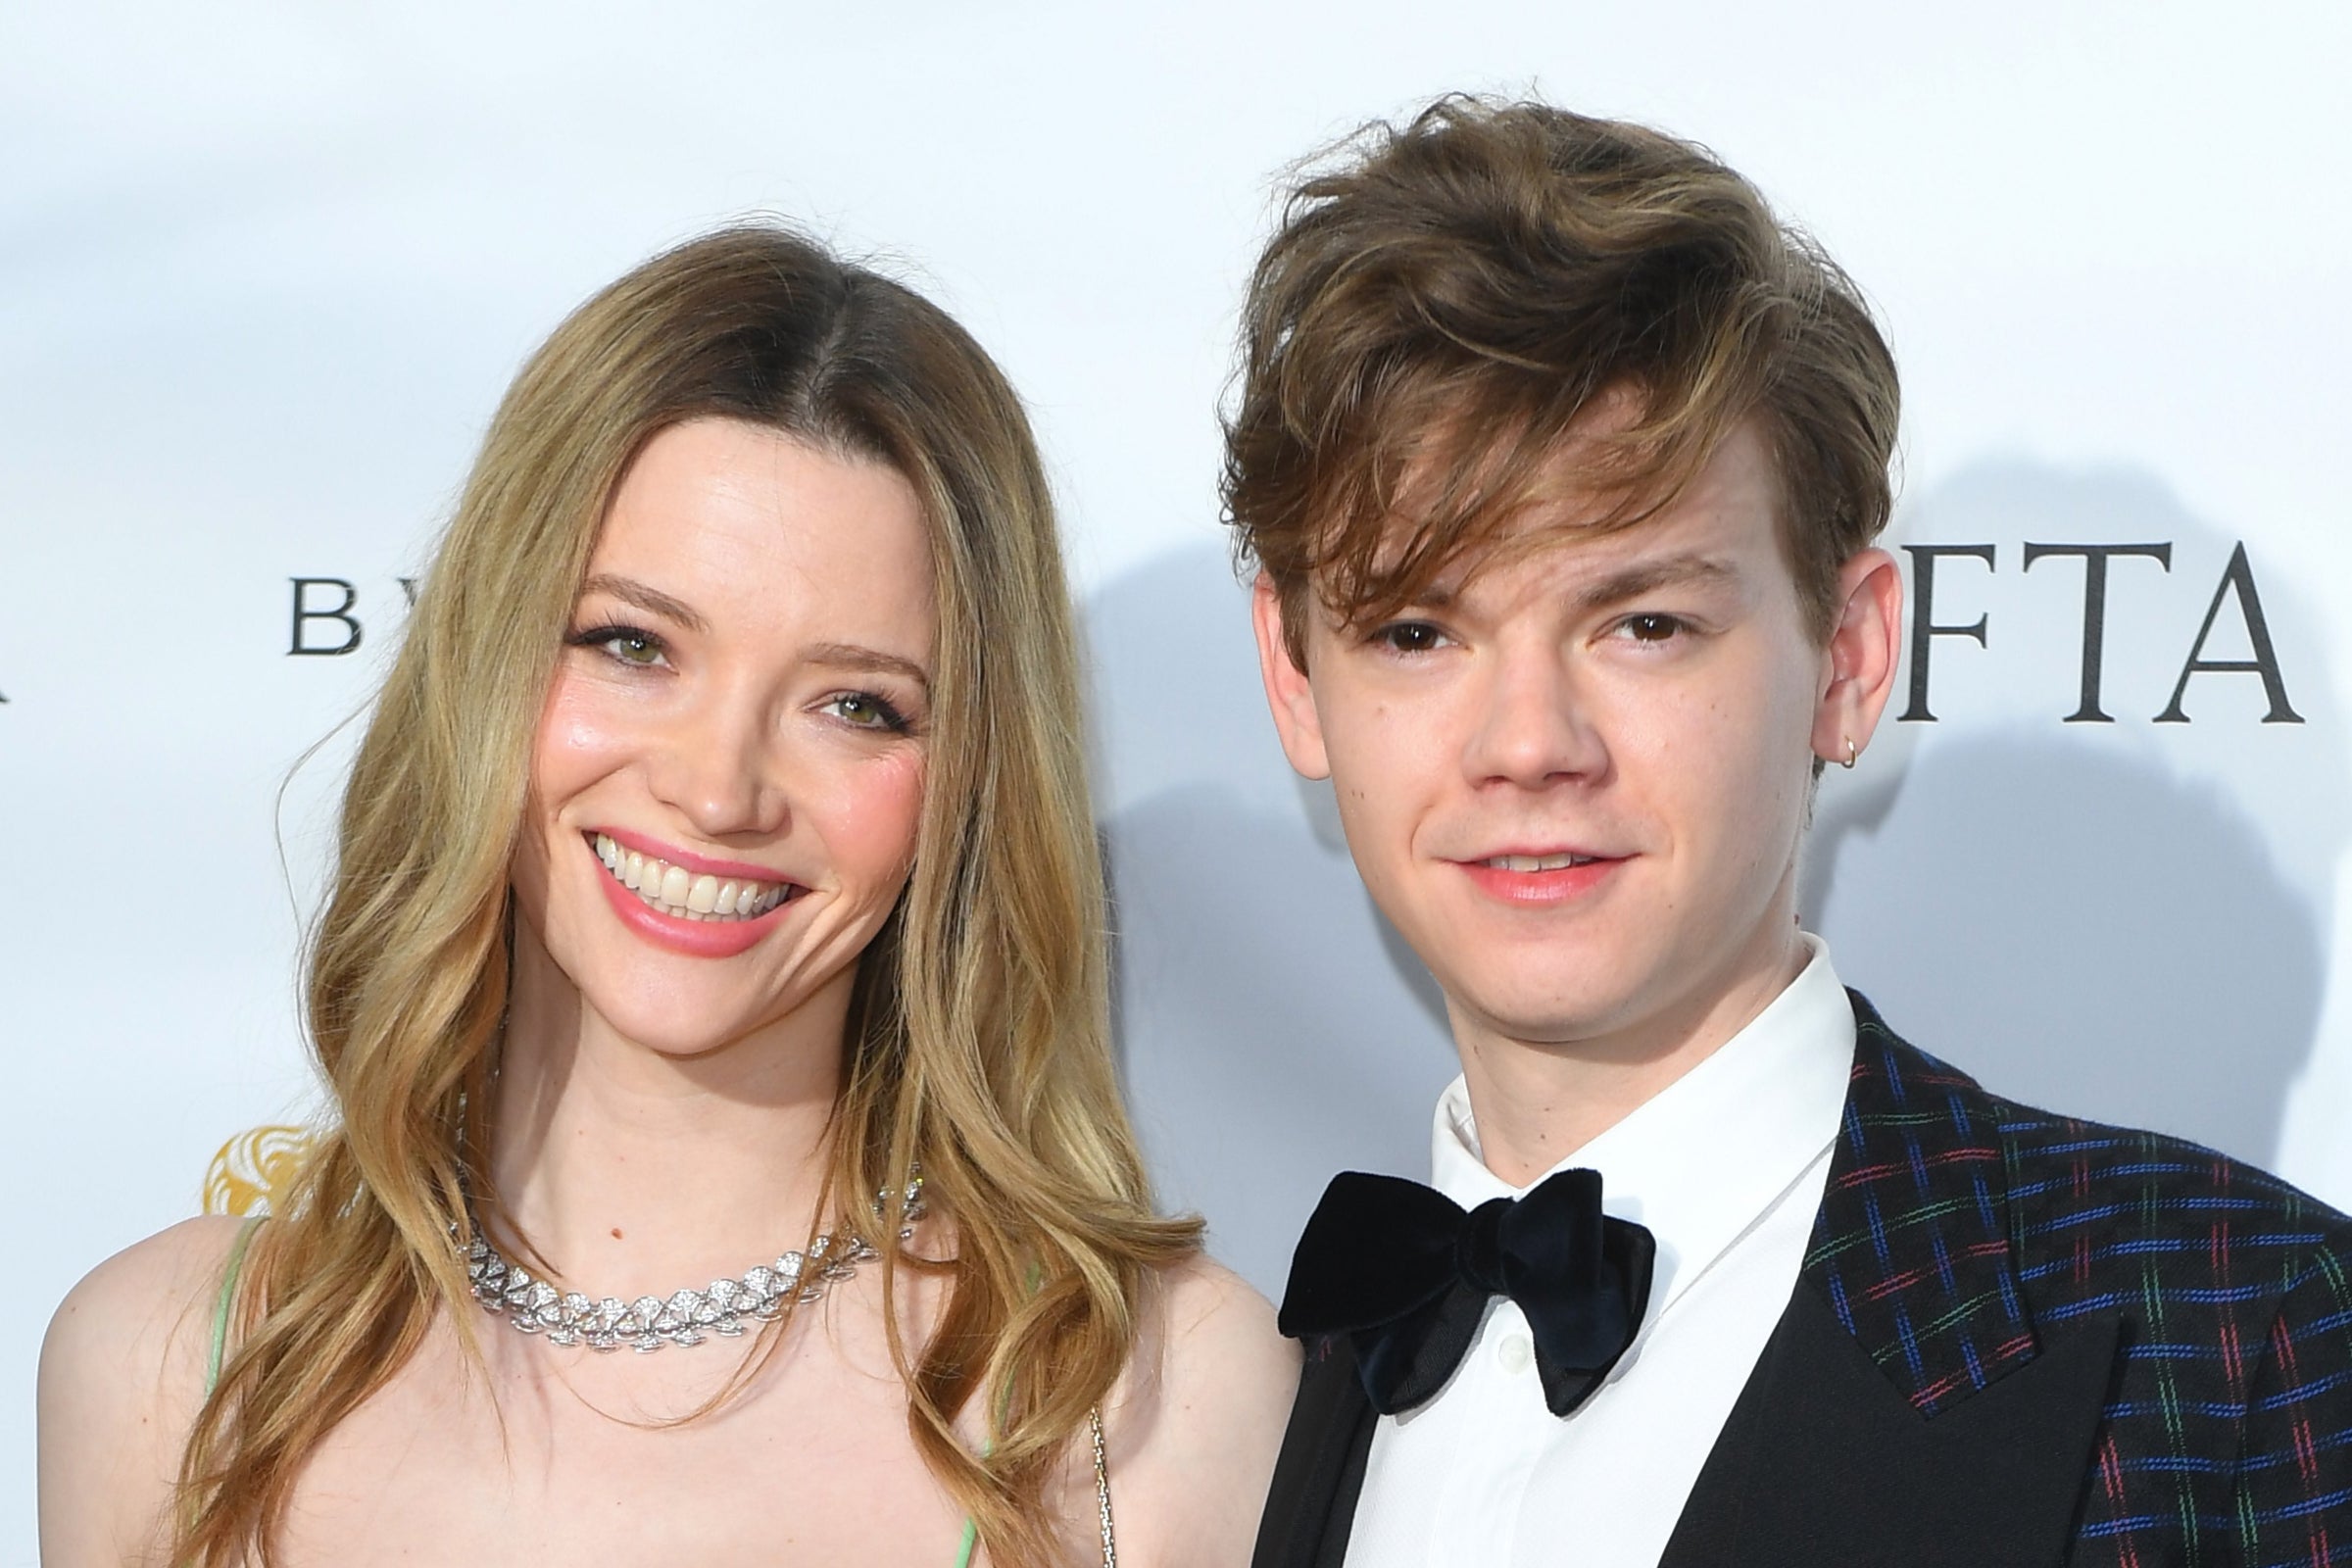 Brodie-Sangster and Riley met on the set of the Sex Pistols drama ‘Pistol’